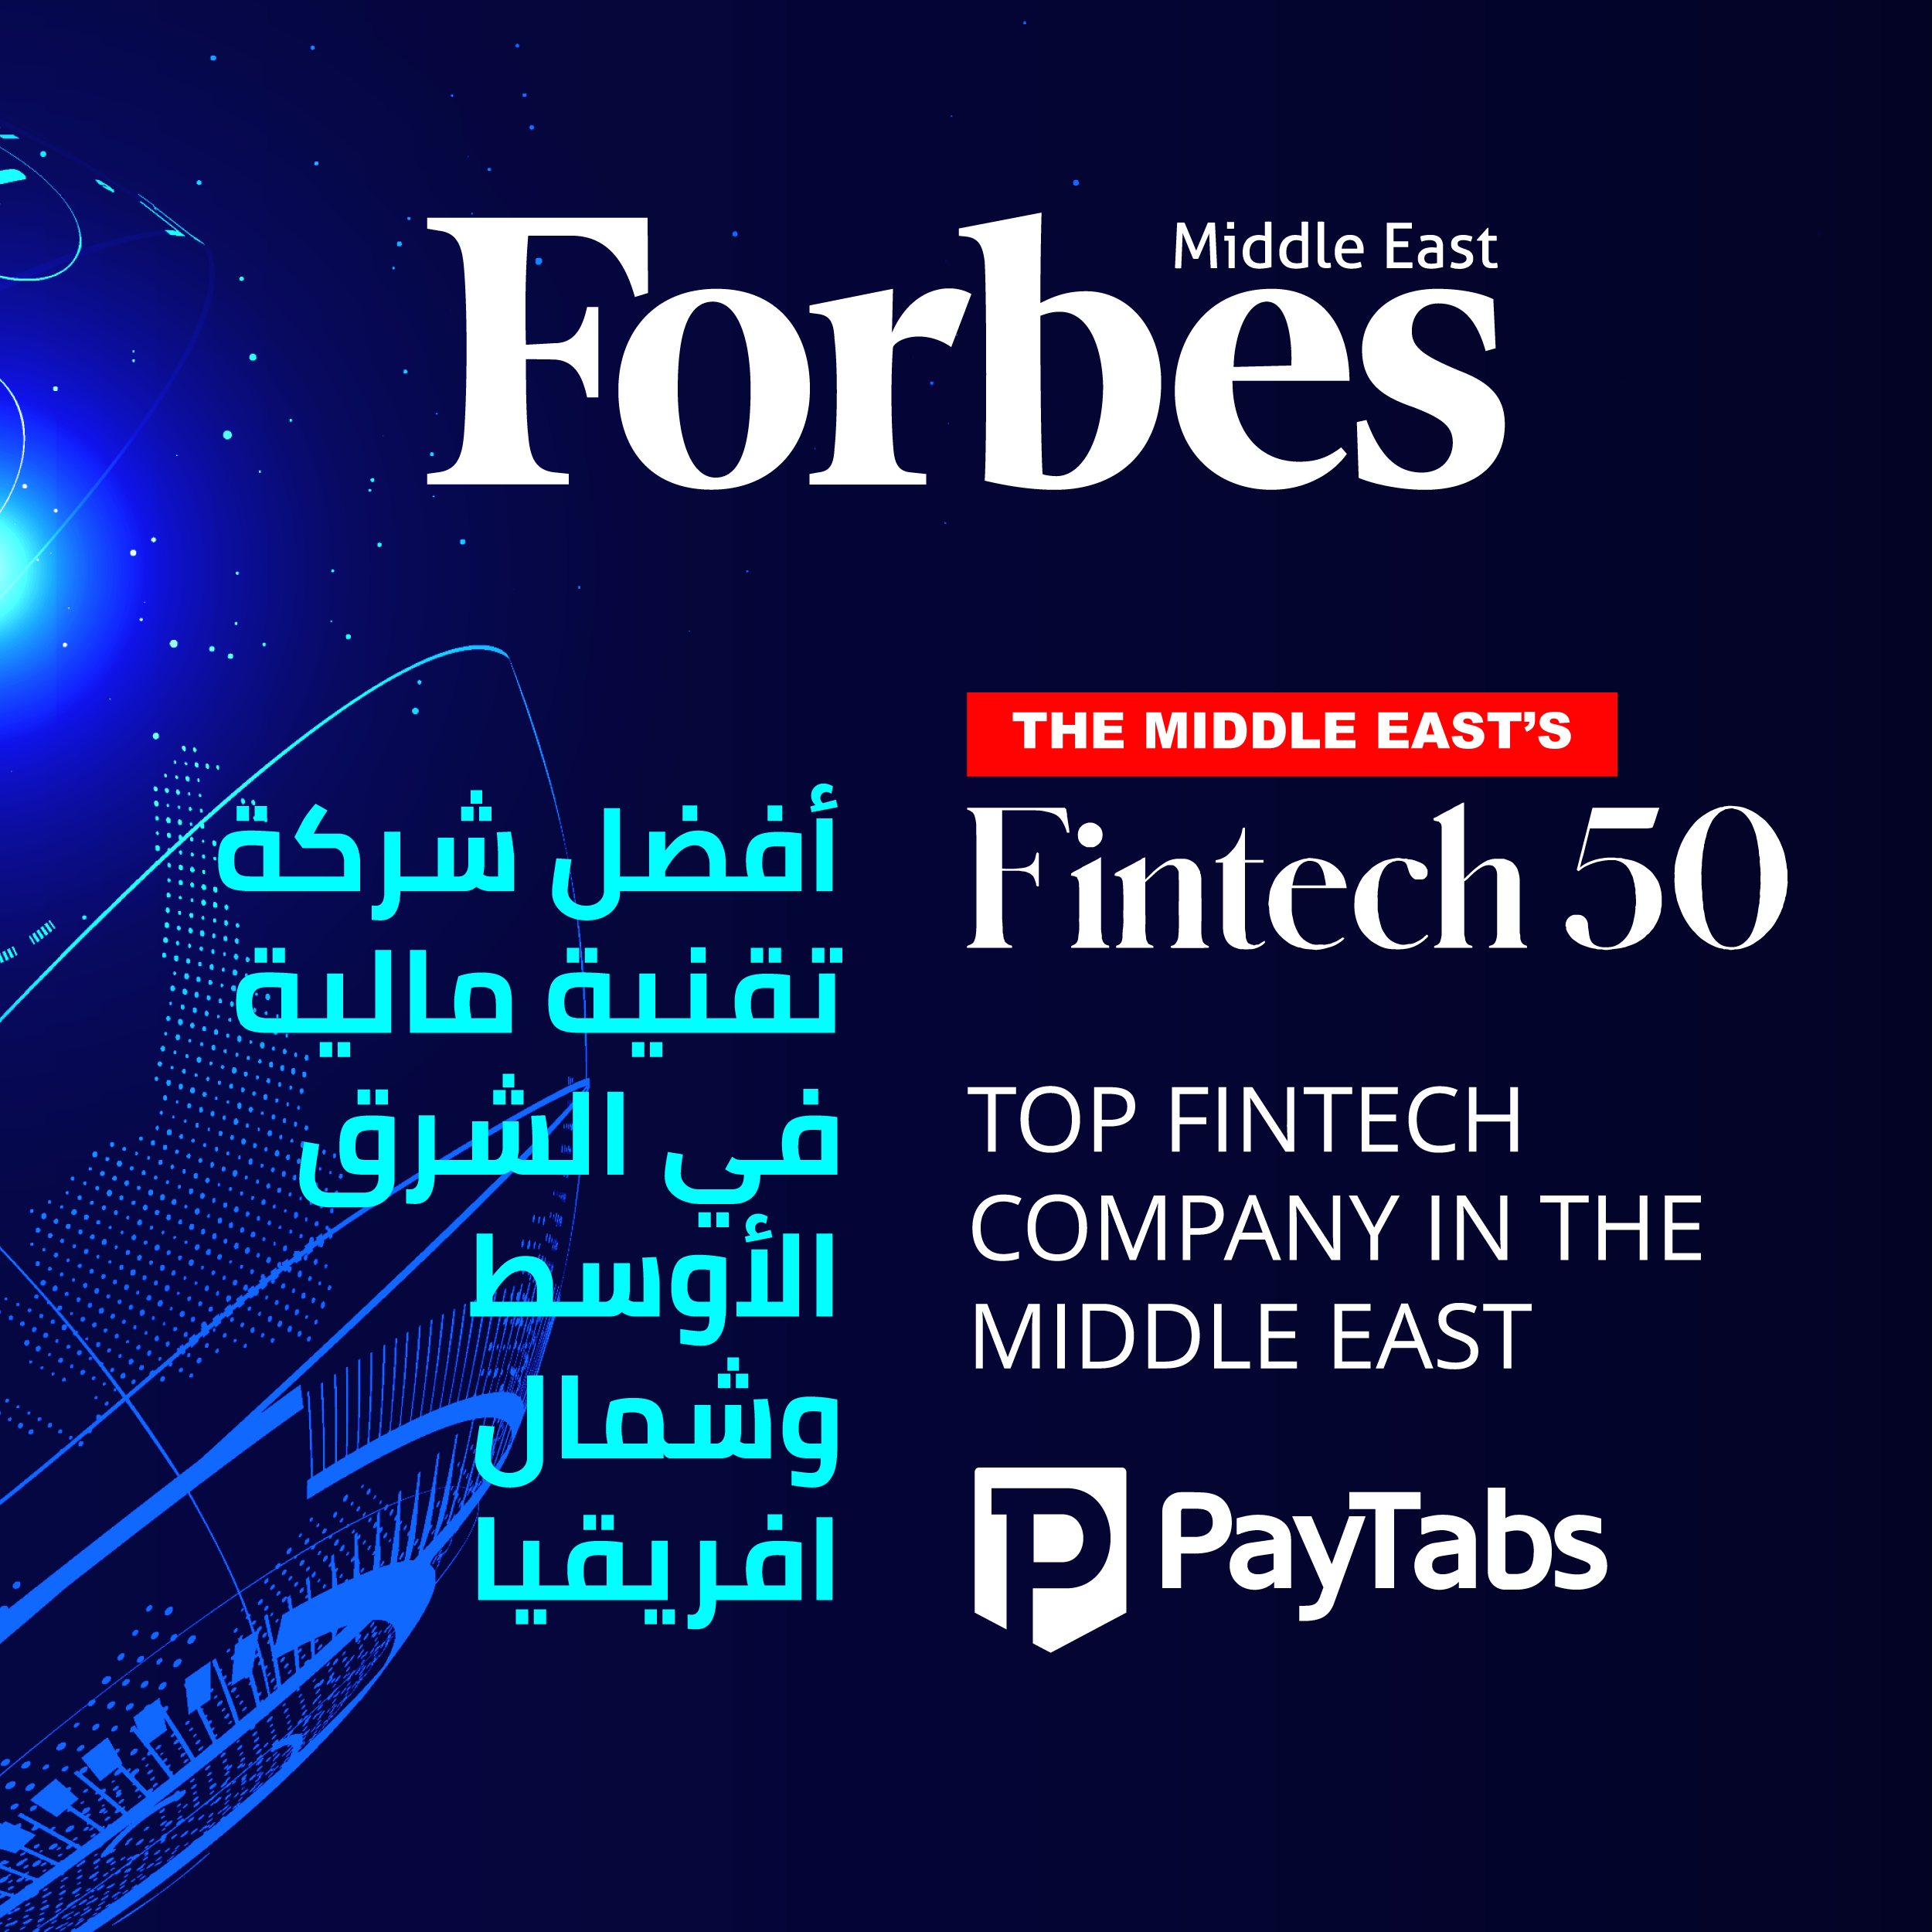 PayTabs Group ranks 5th on Forbest Middle East Fintech 50